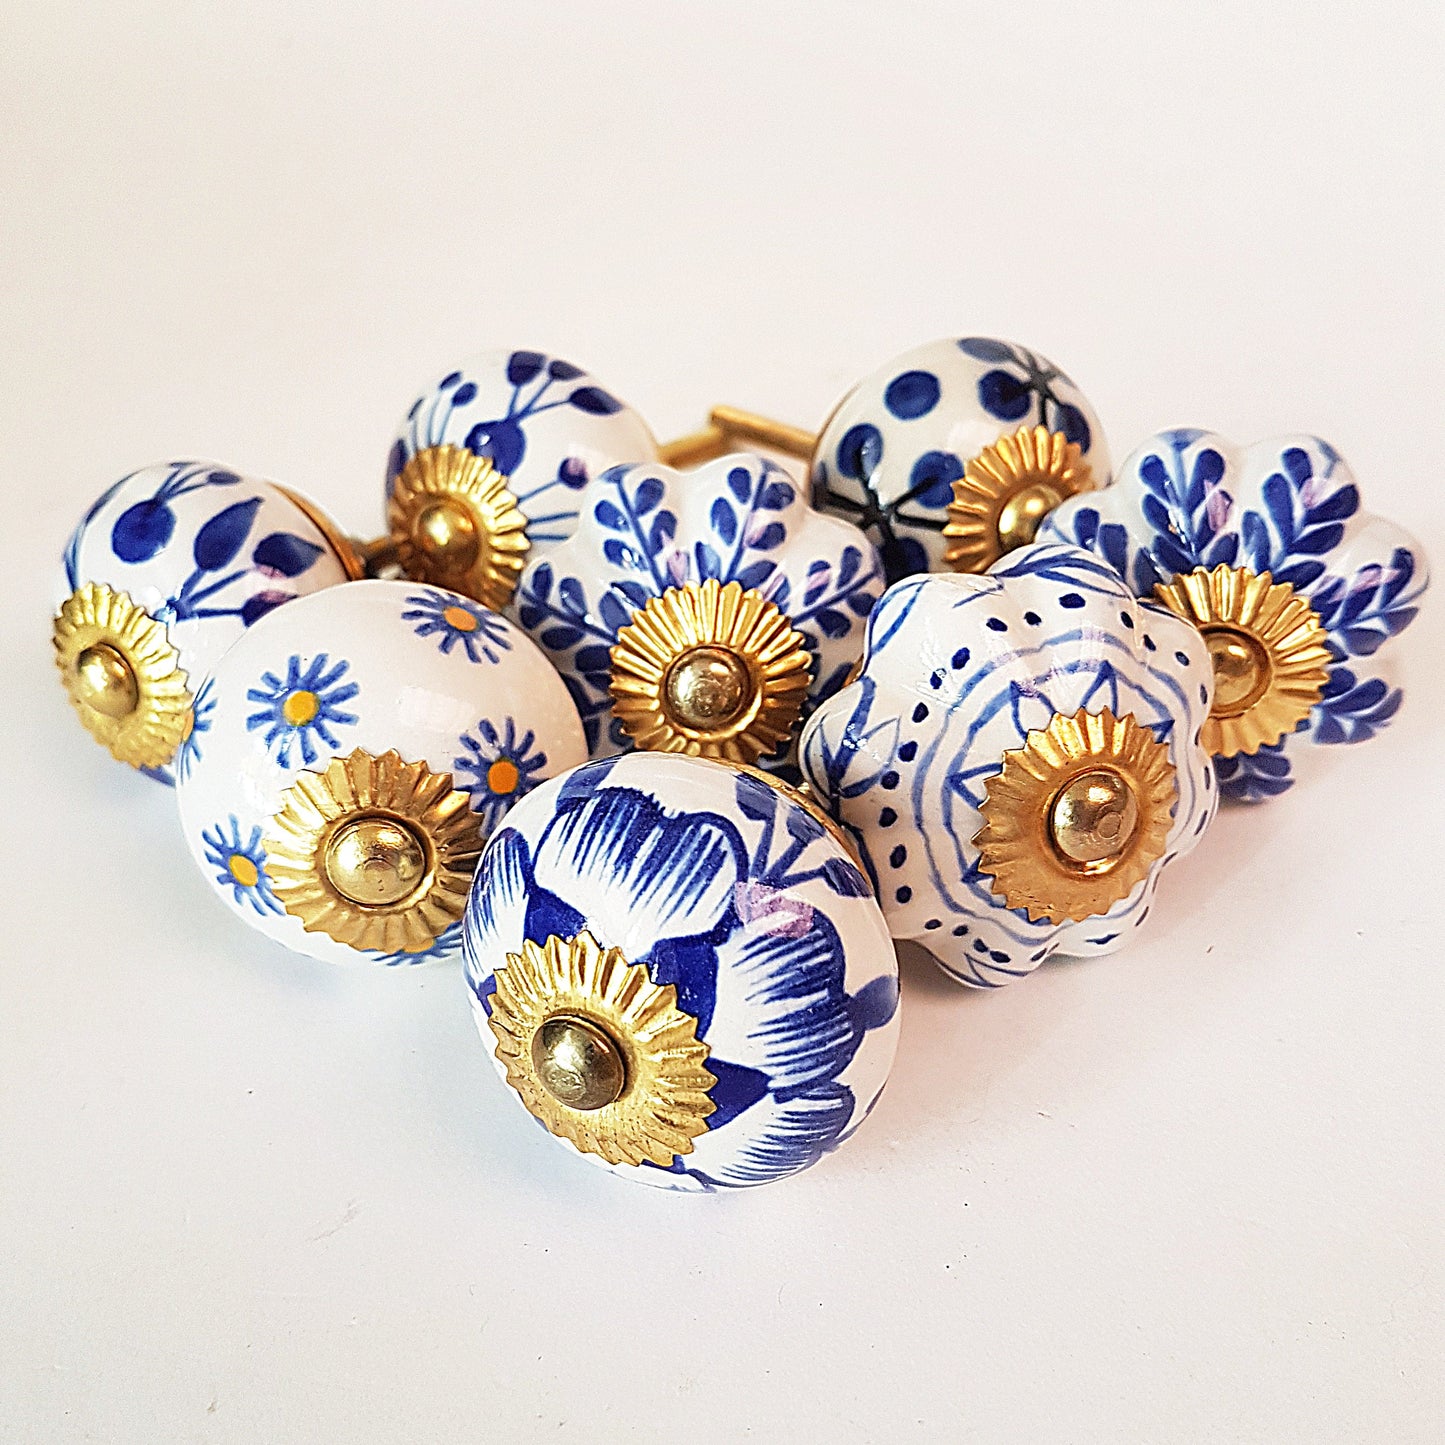 Set of 18 Delft blue cupboard knobs, ceramic hand painted, for cabinets, furniture and home decorating. 18 piece set of knob/drawer pulls. - Vintage India Ca